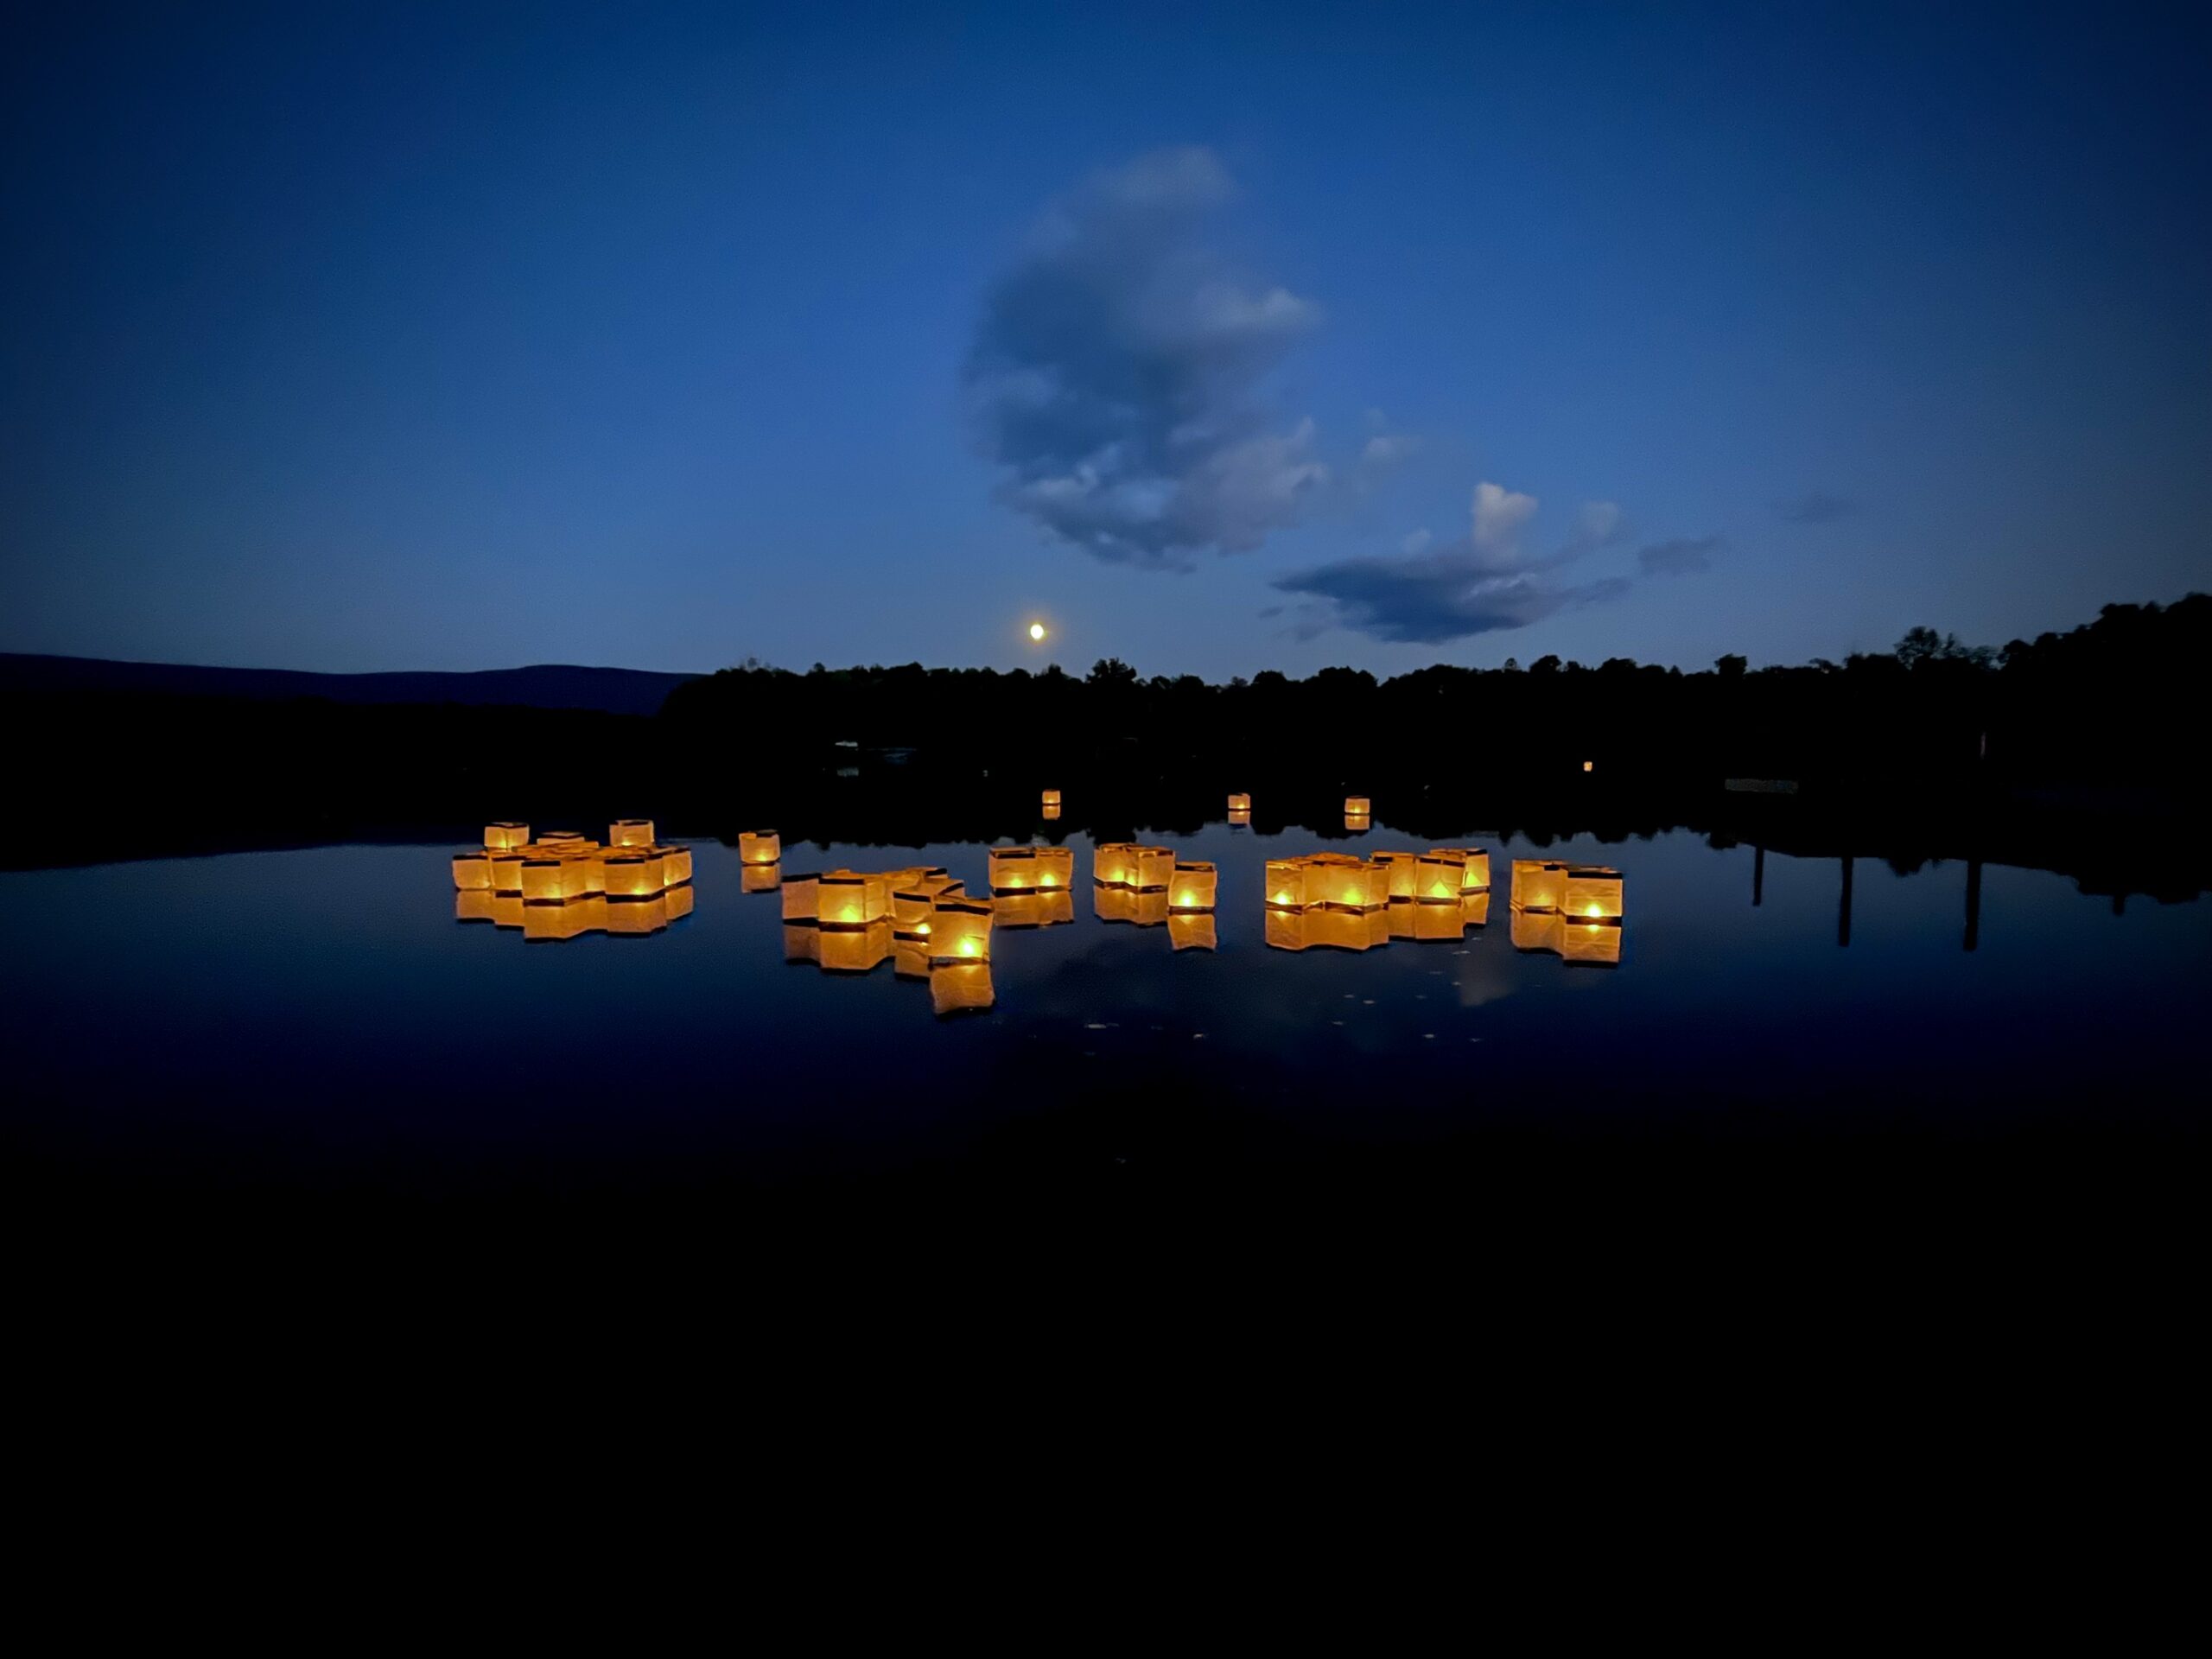 Cube shaped paper lanterns lit with candles float on a dark lake against a darkening blue sky. There is a bright full moon in the background and a couple light clouds. A tree line is also visible just below the moon.